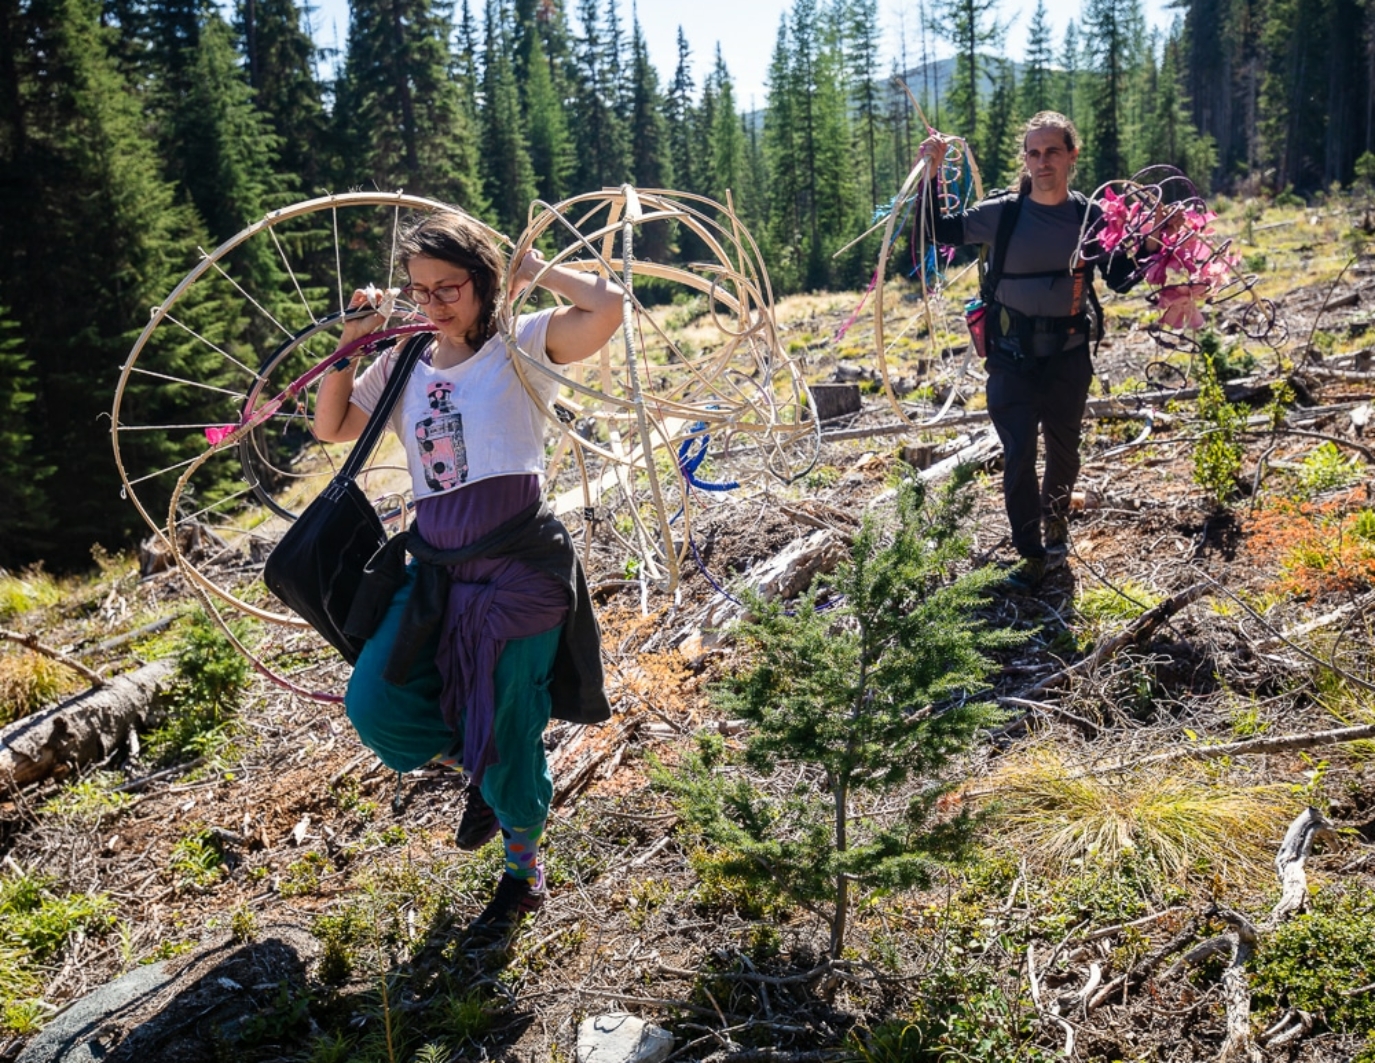 The artist and her partner walk through cut forest with the materials for the puppet installation in their hands. Bamboo wheels and flowers and backpacks. Some of the materials are wood and others have pink and purple colors, which are handmade silk flowers. The forest here is cut down, but, in the background there are green trees and blue sky and mountains.